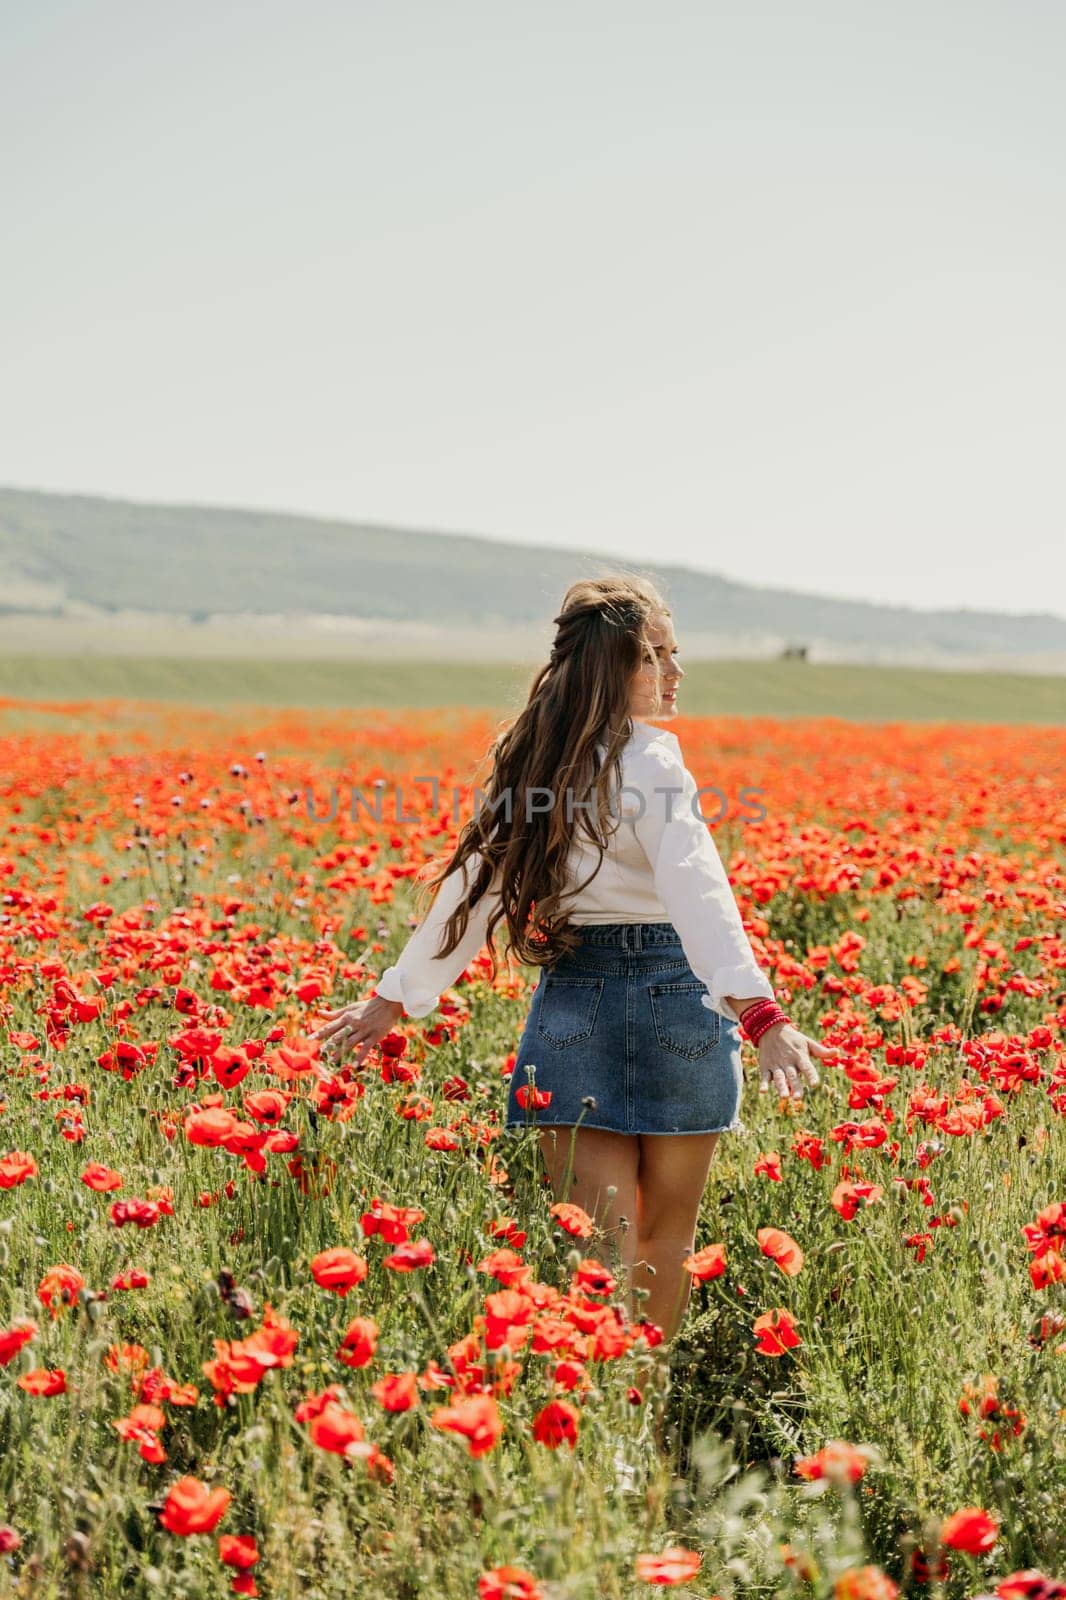 Woman poppies field. Back view of a happy woman with long hair in a poppy field and enjoying the beauty of nature in a warm summer day